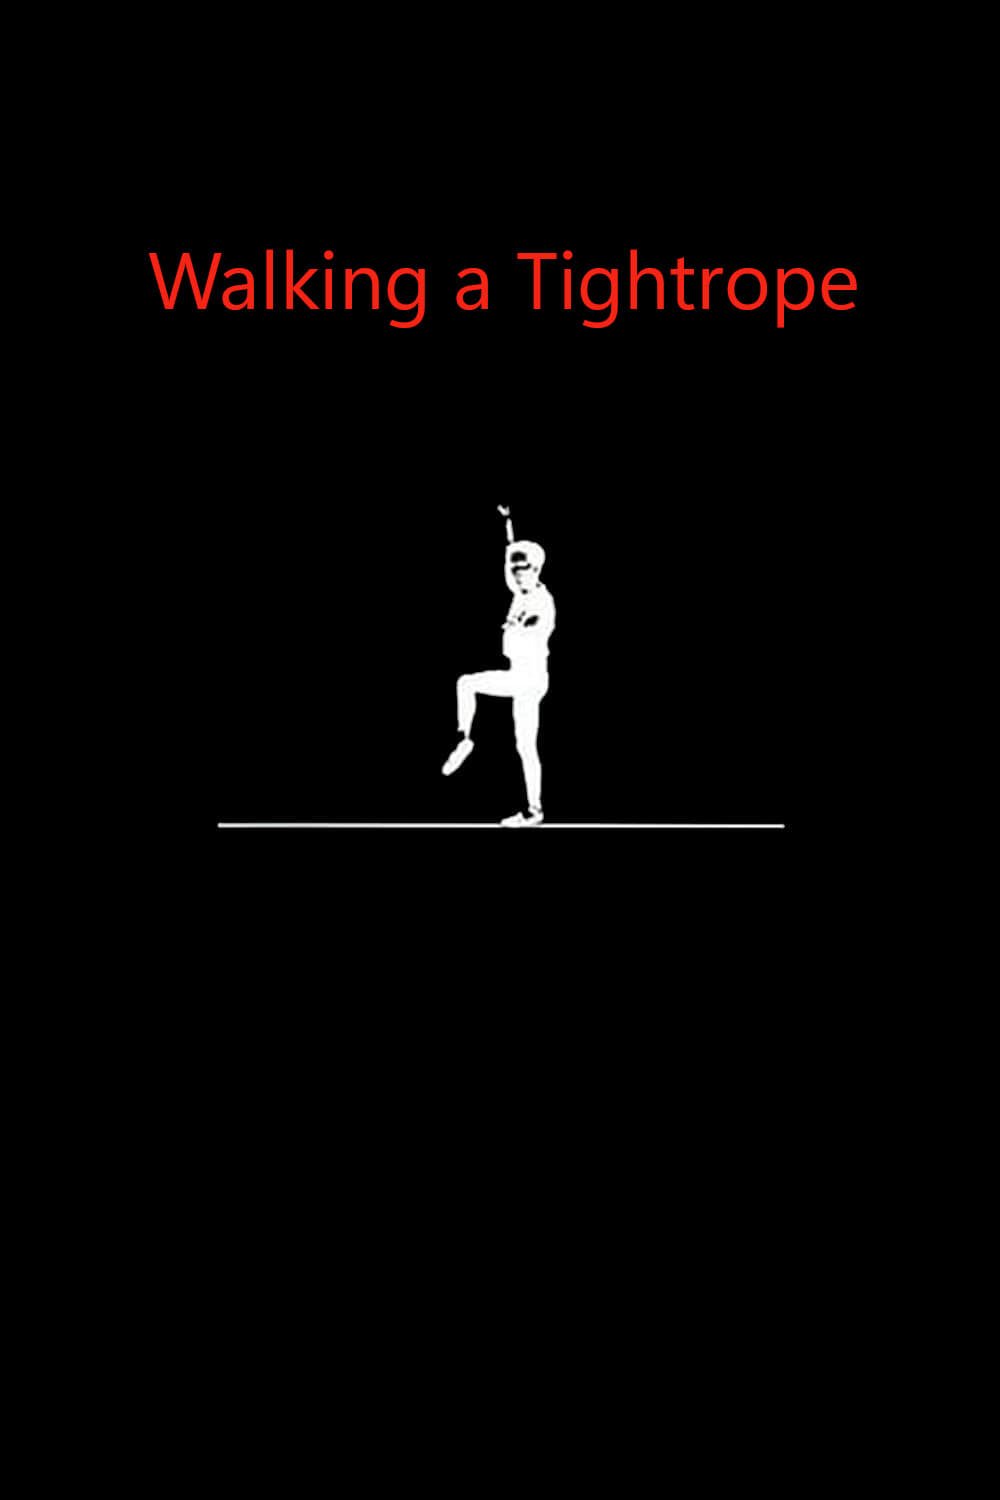 Walking a Tightrope (1991)